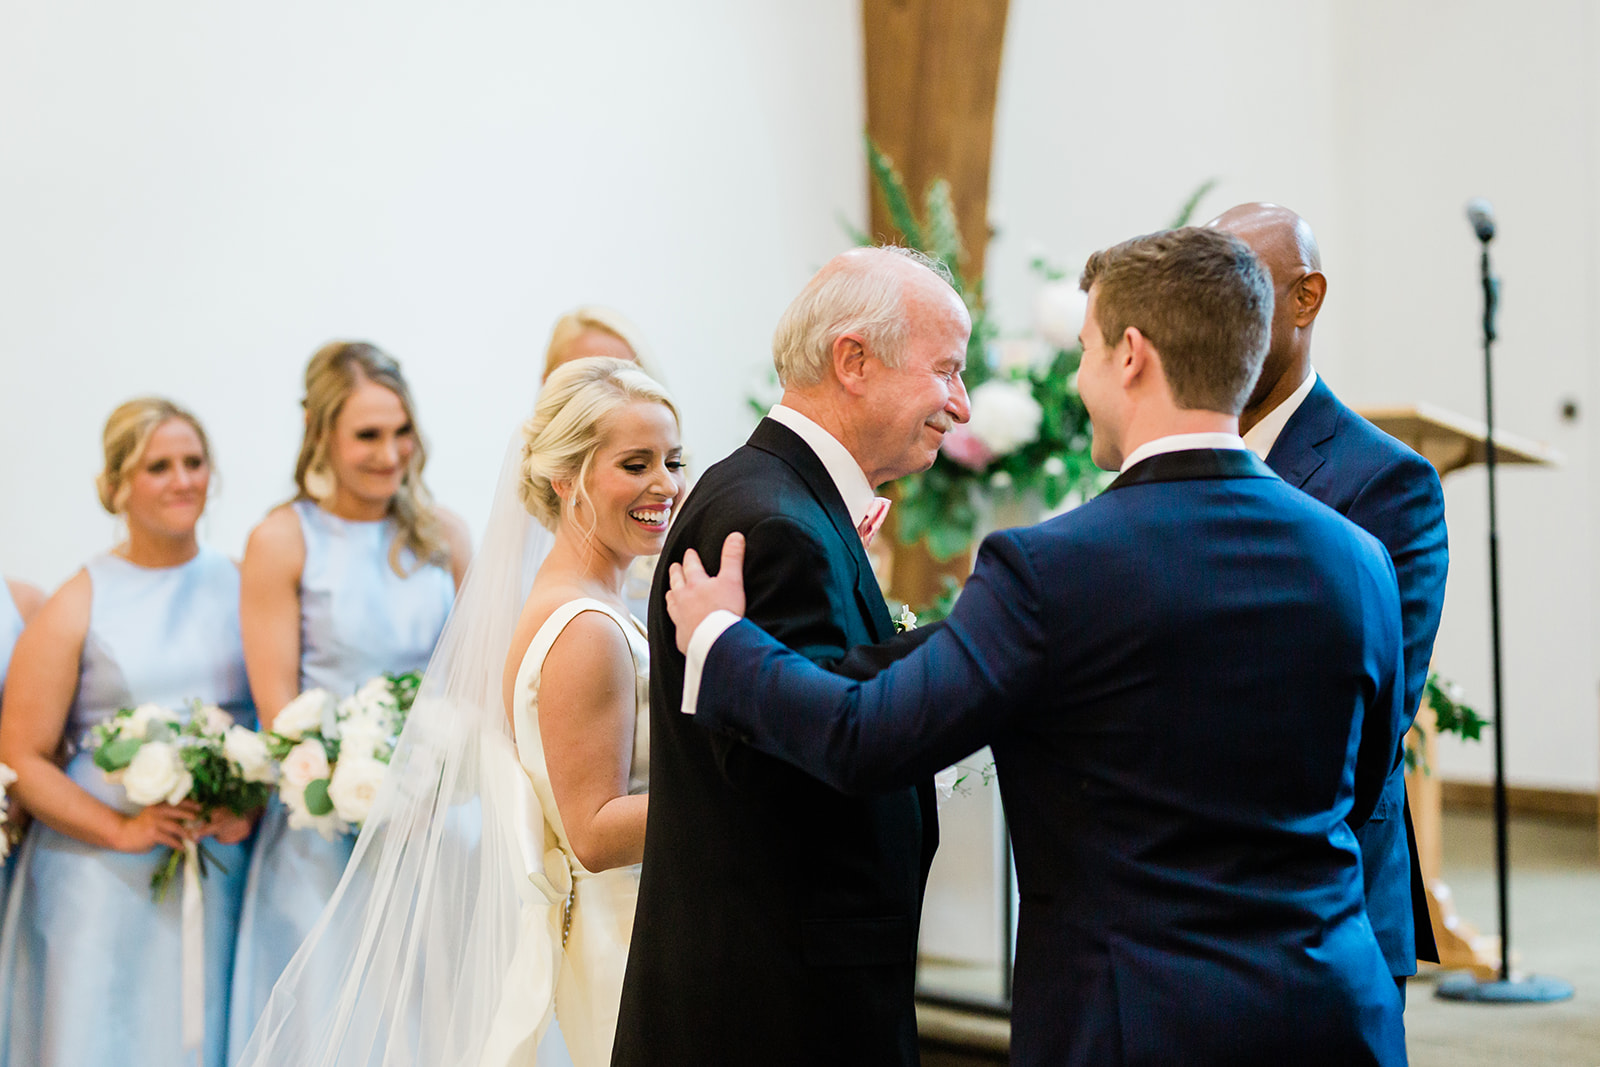 father hands bride to groom at alter